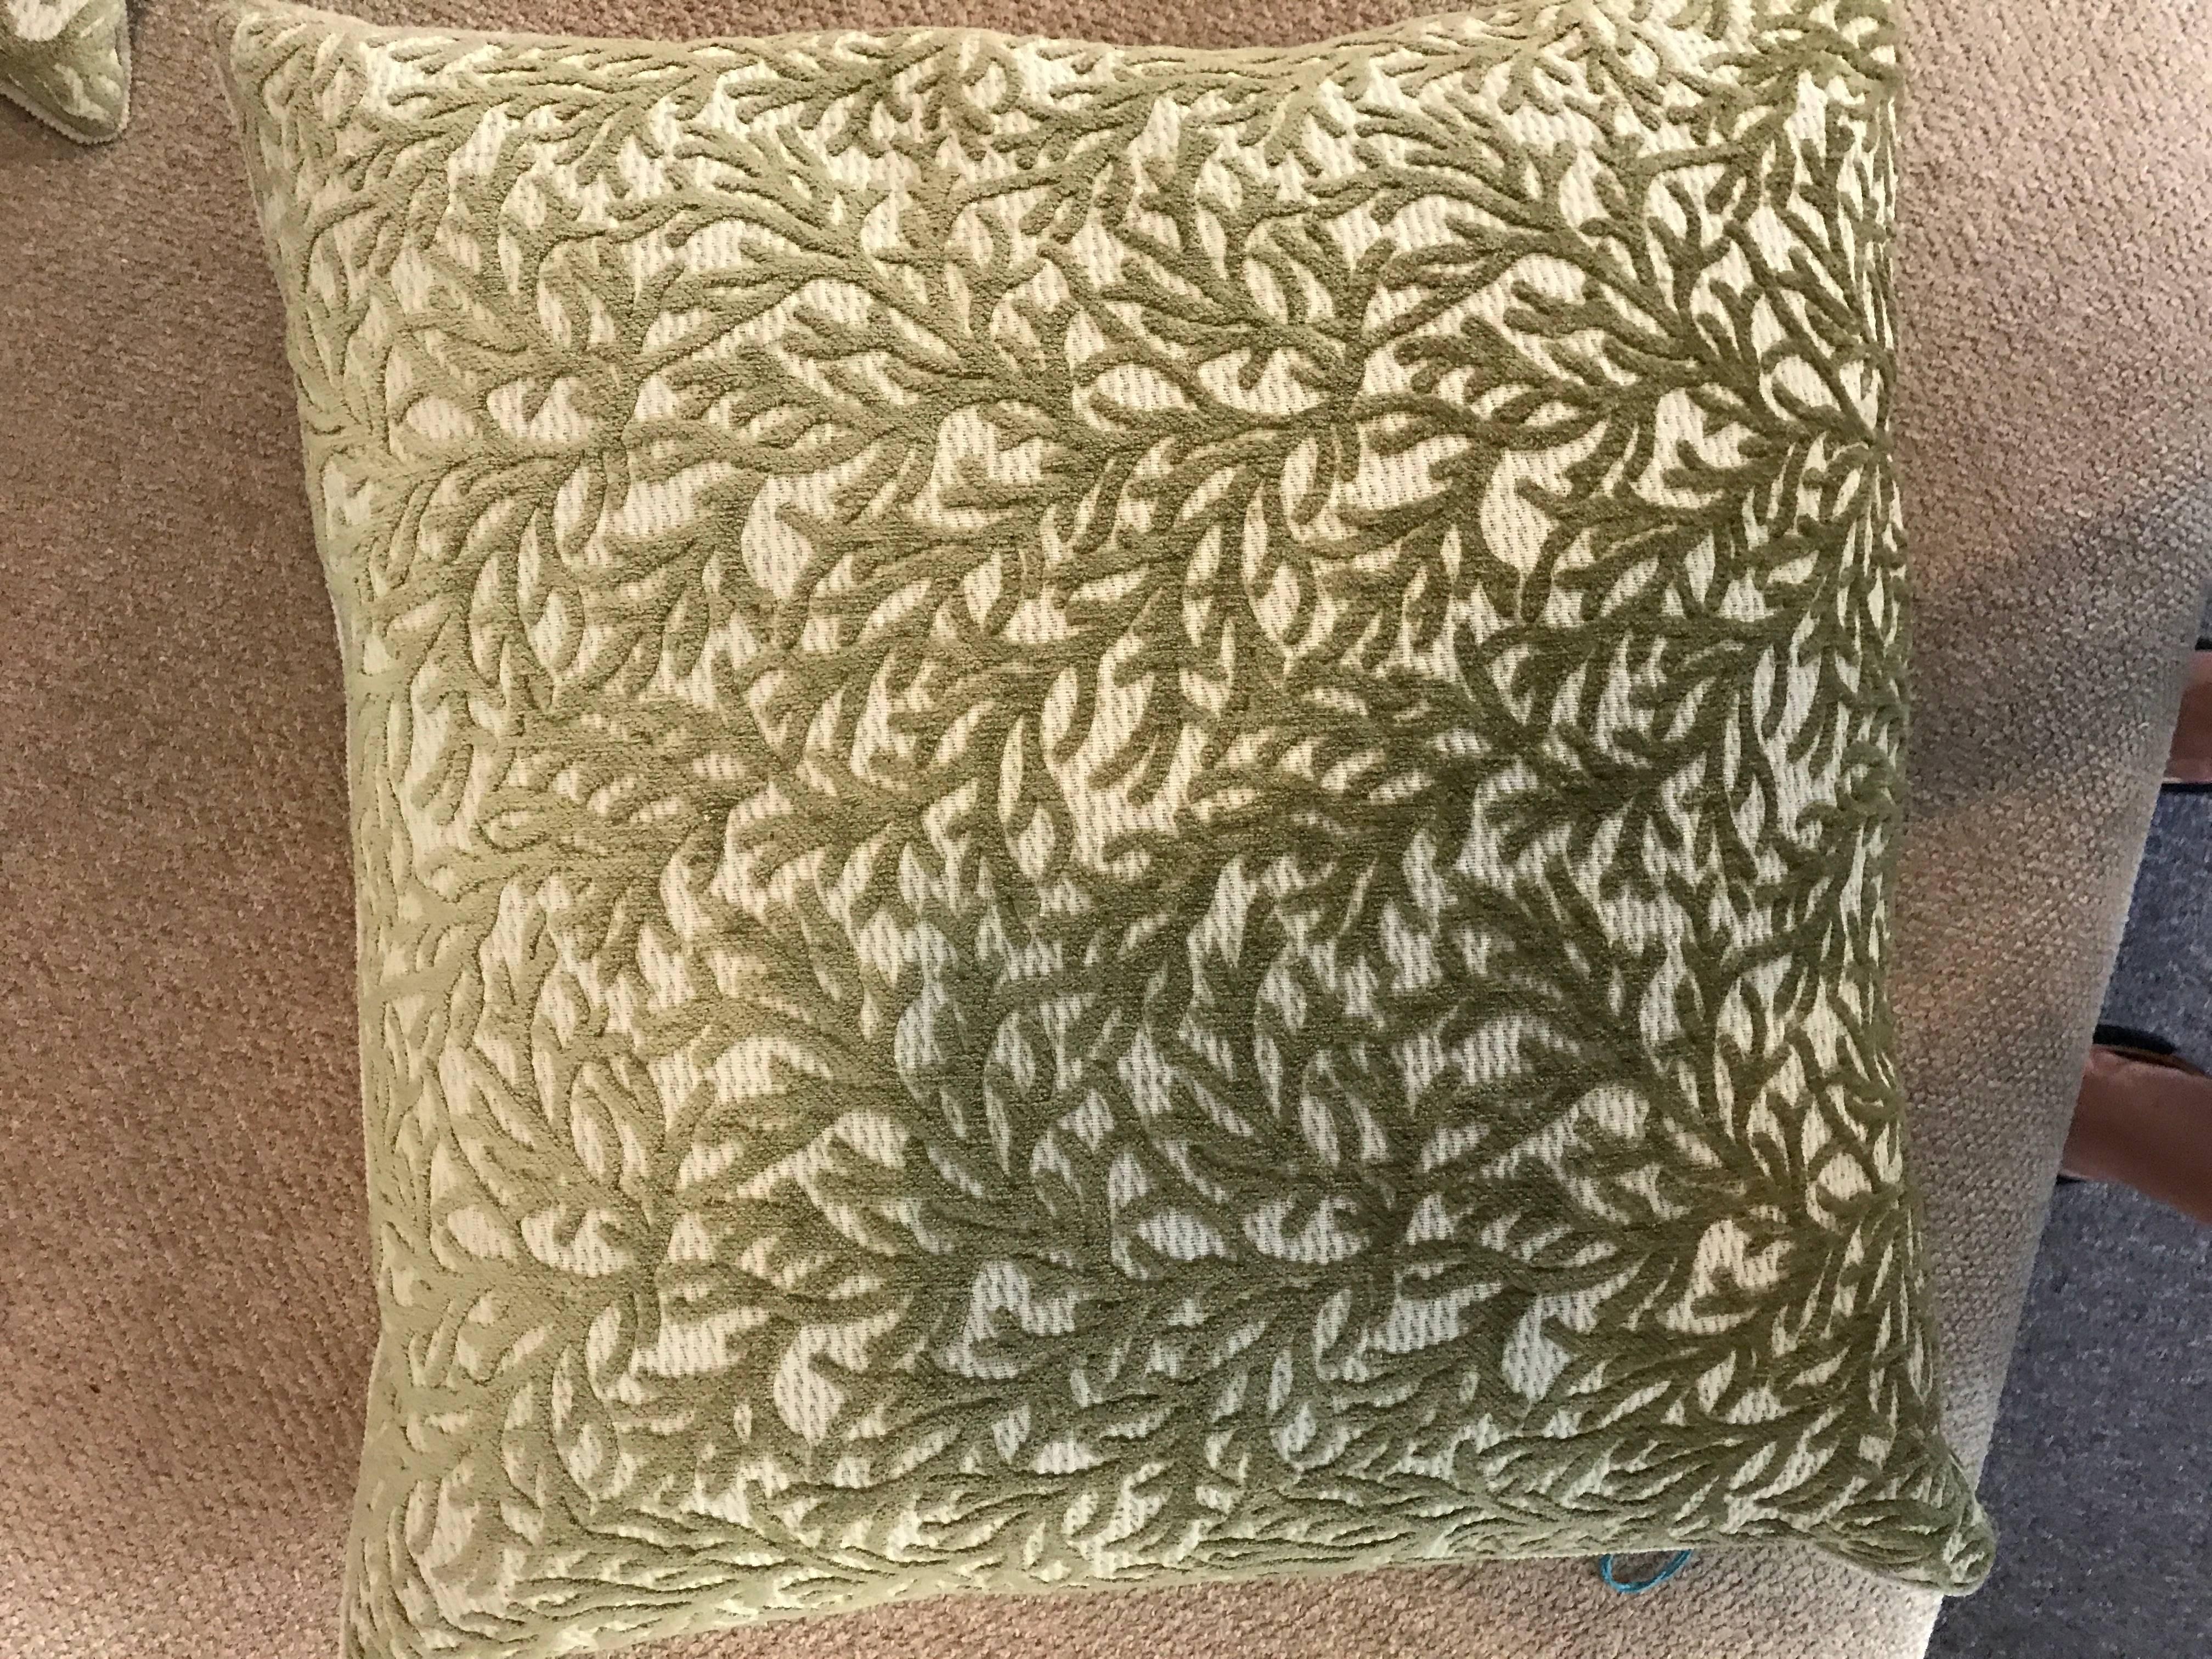 These pair of high end pillows came from the premiere home store in Palm Springs CA that closed over a decade ago. Purchased by my clients, they were never used and are as new. The sage color coral jacquard is on a raised beige ribbed fabric. the